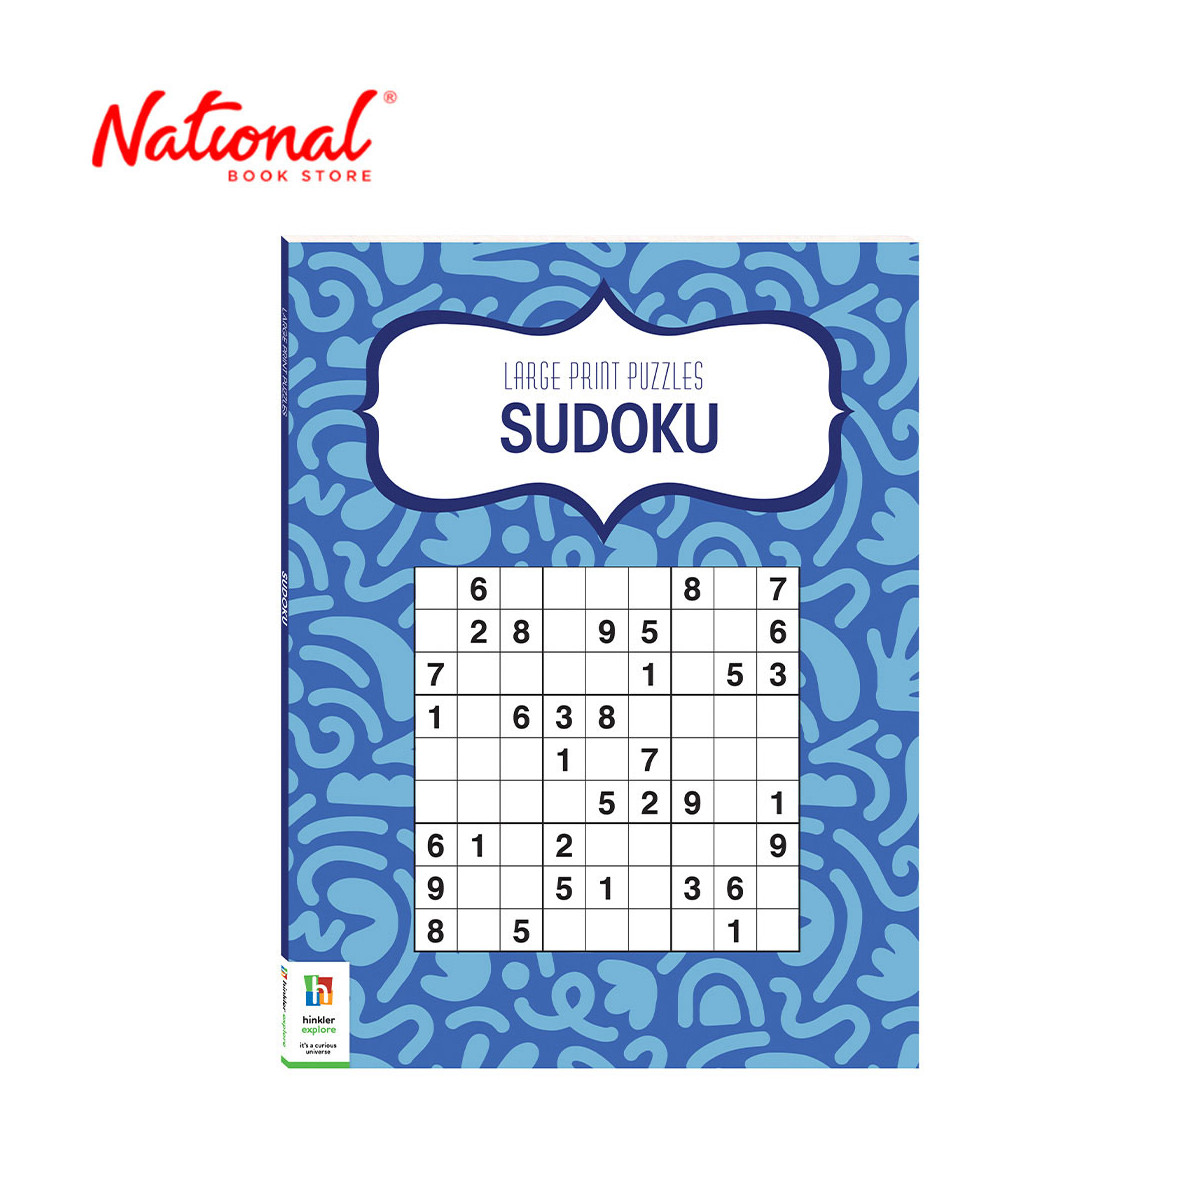 Large Print Puzzles Sudoku by Hinkler Books Pty Ltd - Trade Paperback - Lifestyle - Leisure